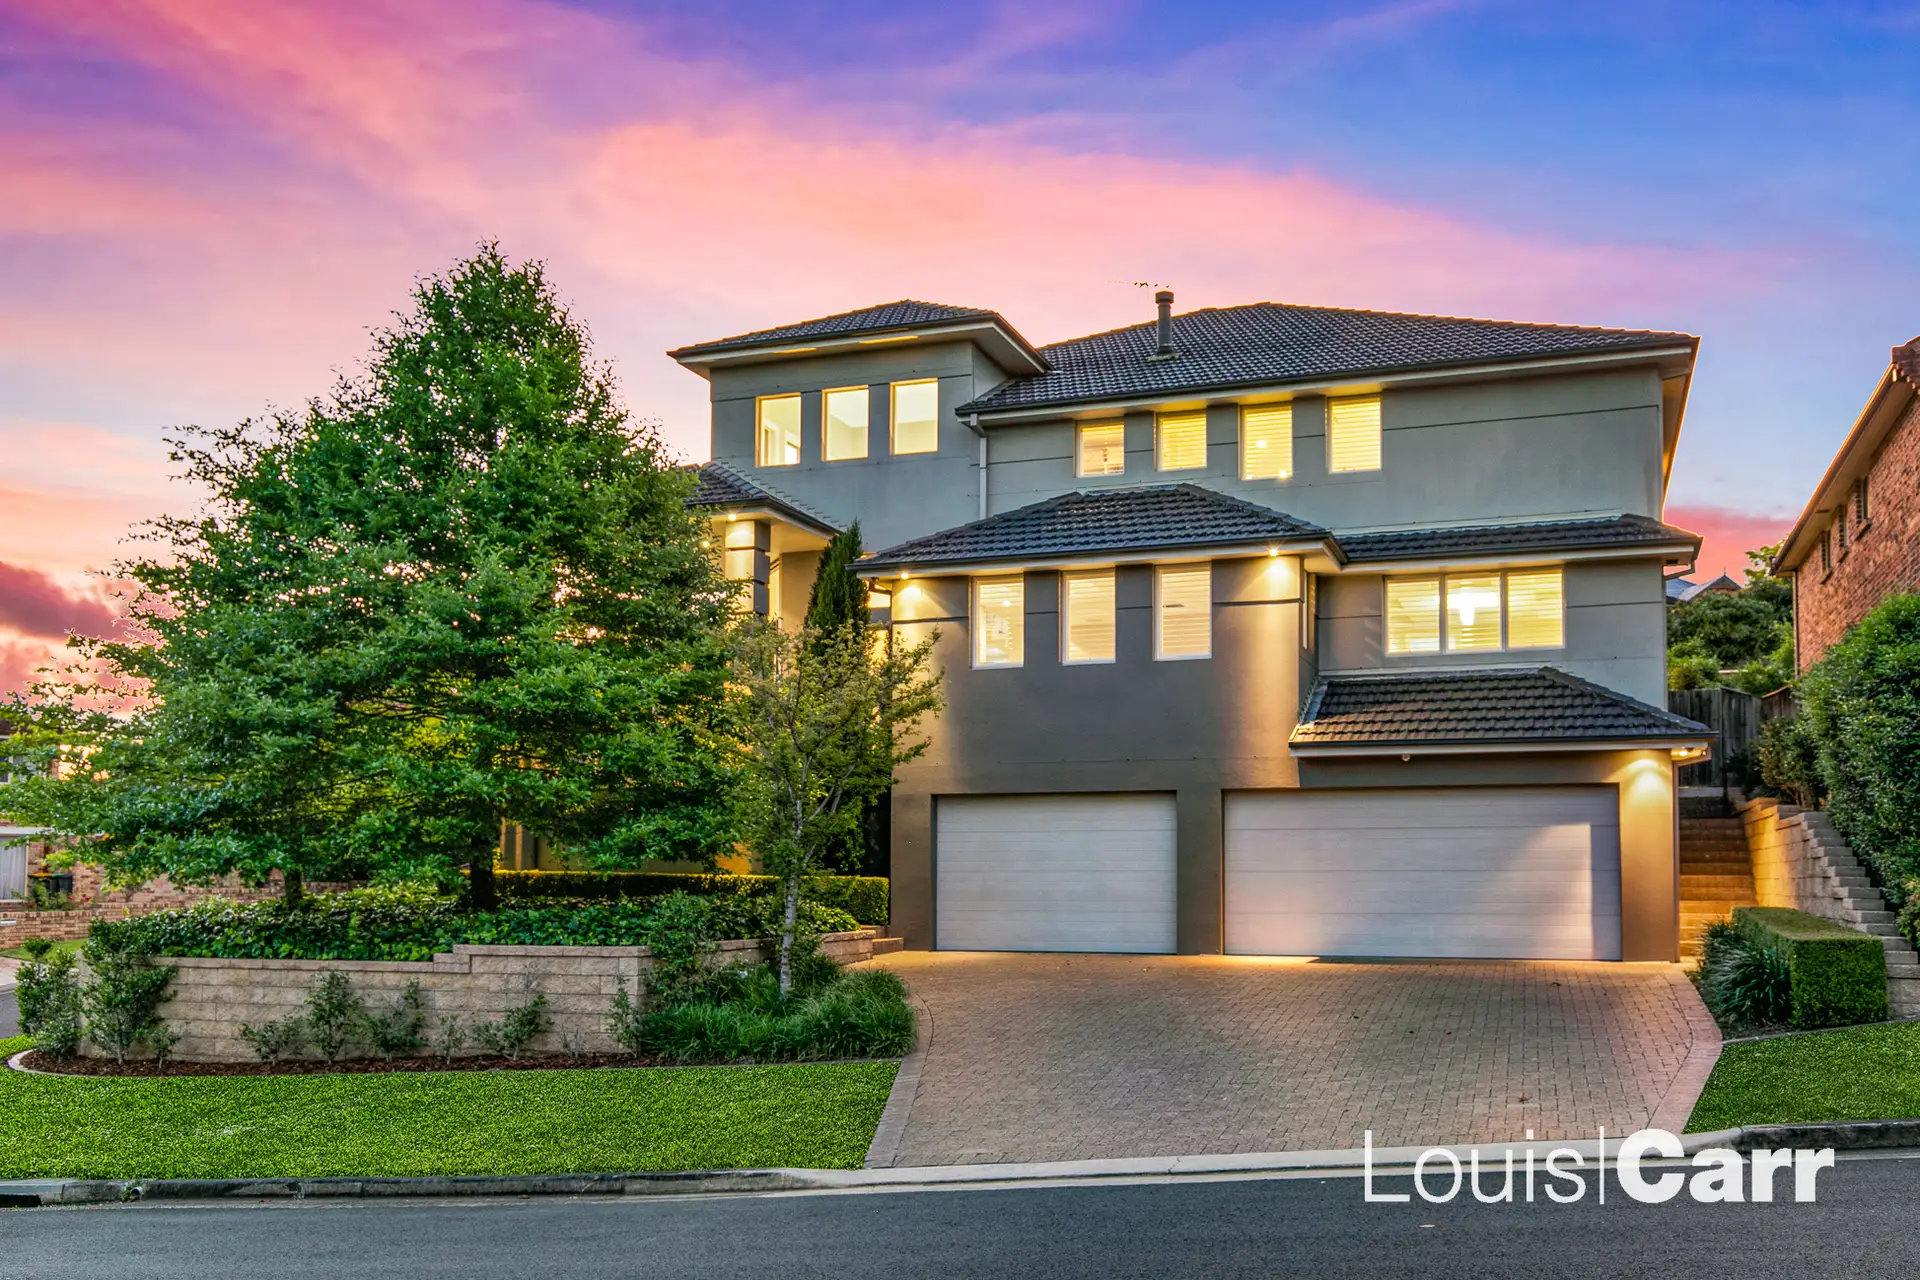 1 Brindabella Place, West Pennant Hills Sold by Louis Carr Real Estate - image 1